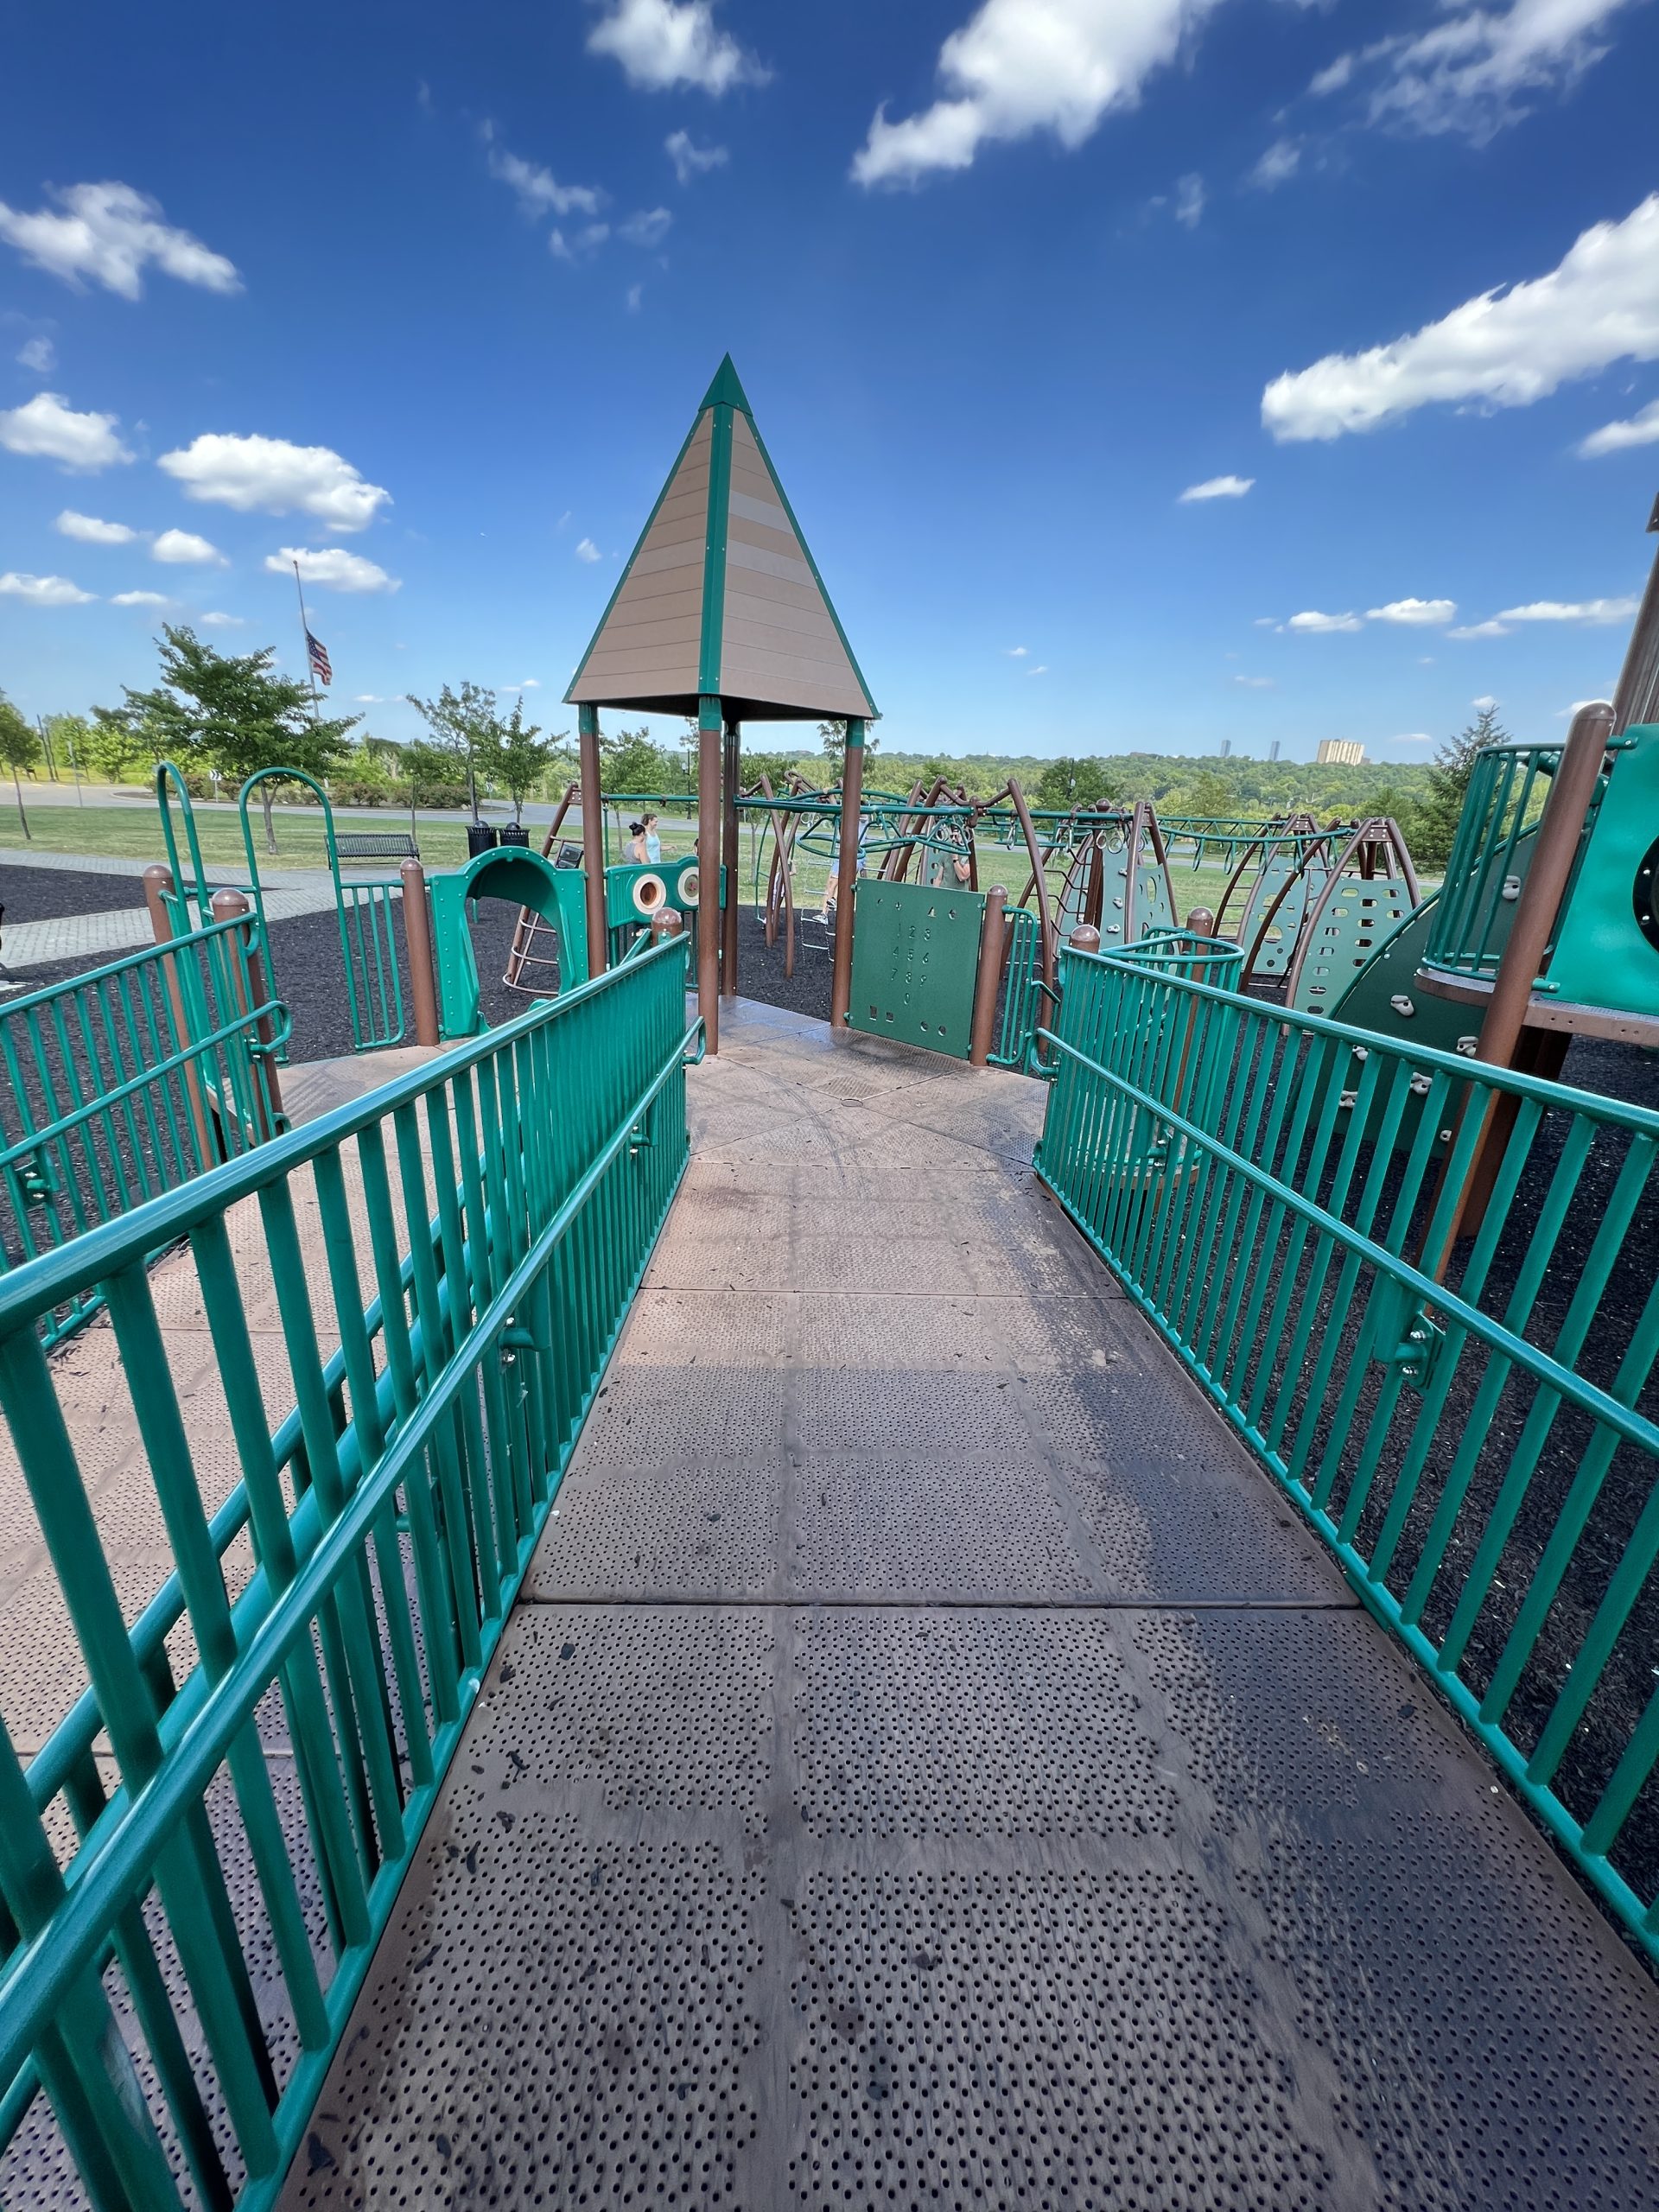 ACCESSIBLE - wide paths 2 at Overpeck County Park Playground in Leonia NJ